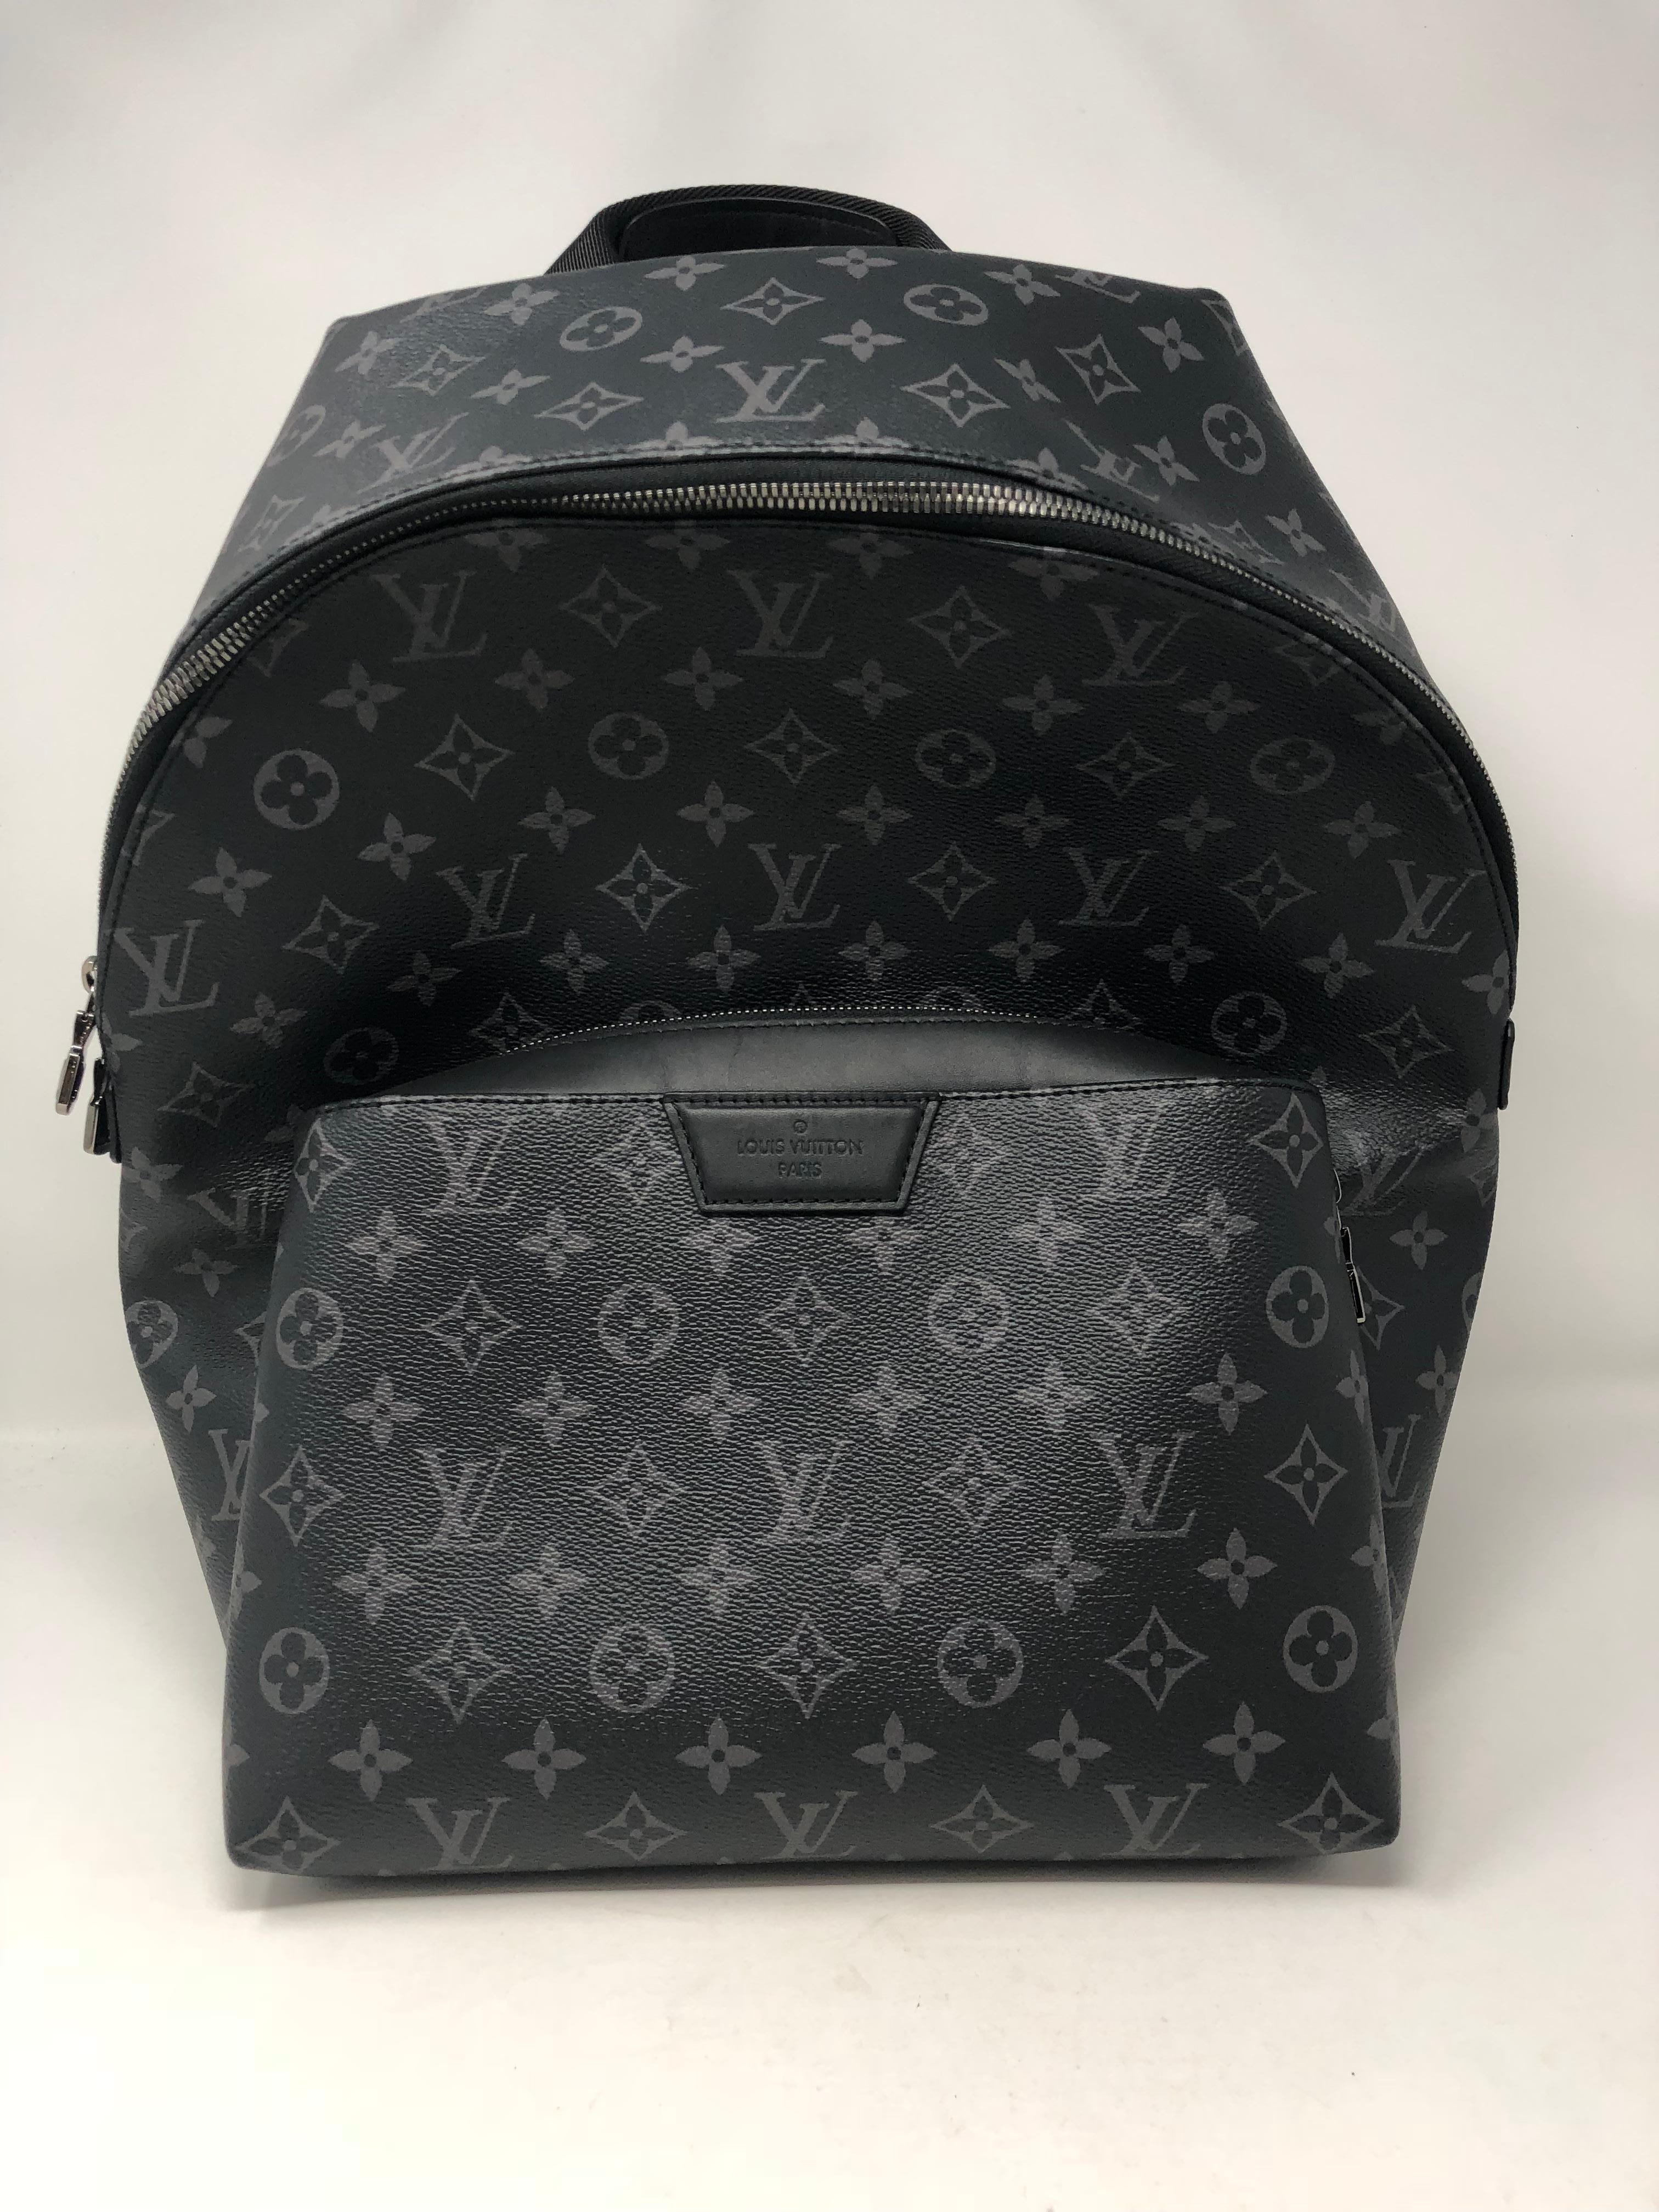 Louis Vuitton Monogram Eclipse Canvas Backpack. Brand new and sold out. Comfortable leather straps and nice size to fill all your goods. Front pocket with a magnetic closure. Comes with original dust cover and box.